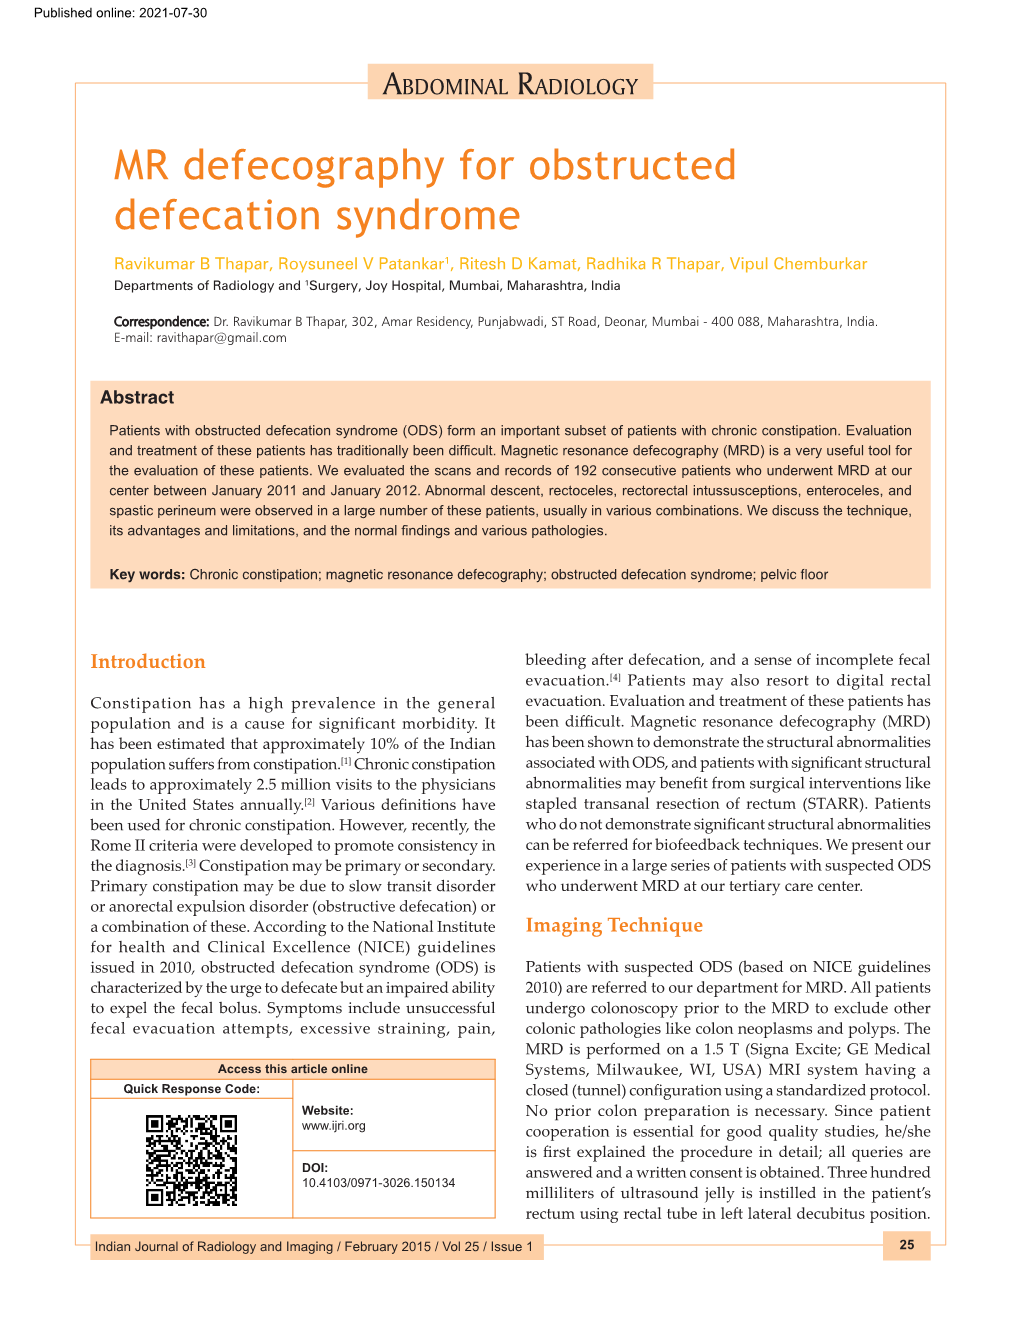 MR Defecography for Obstructed Defecation Syndrome